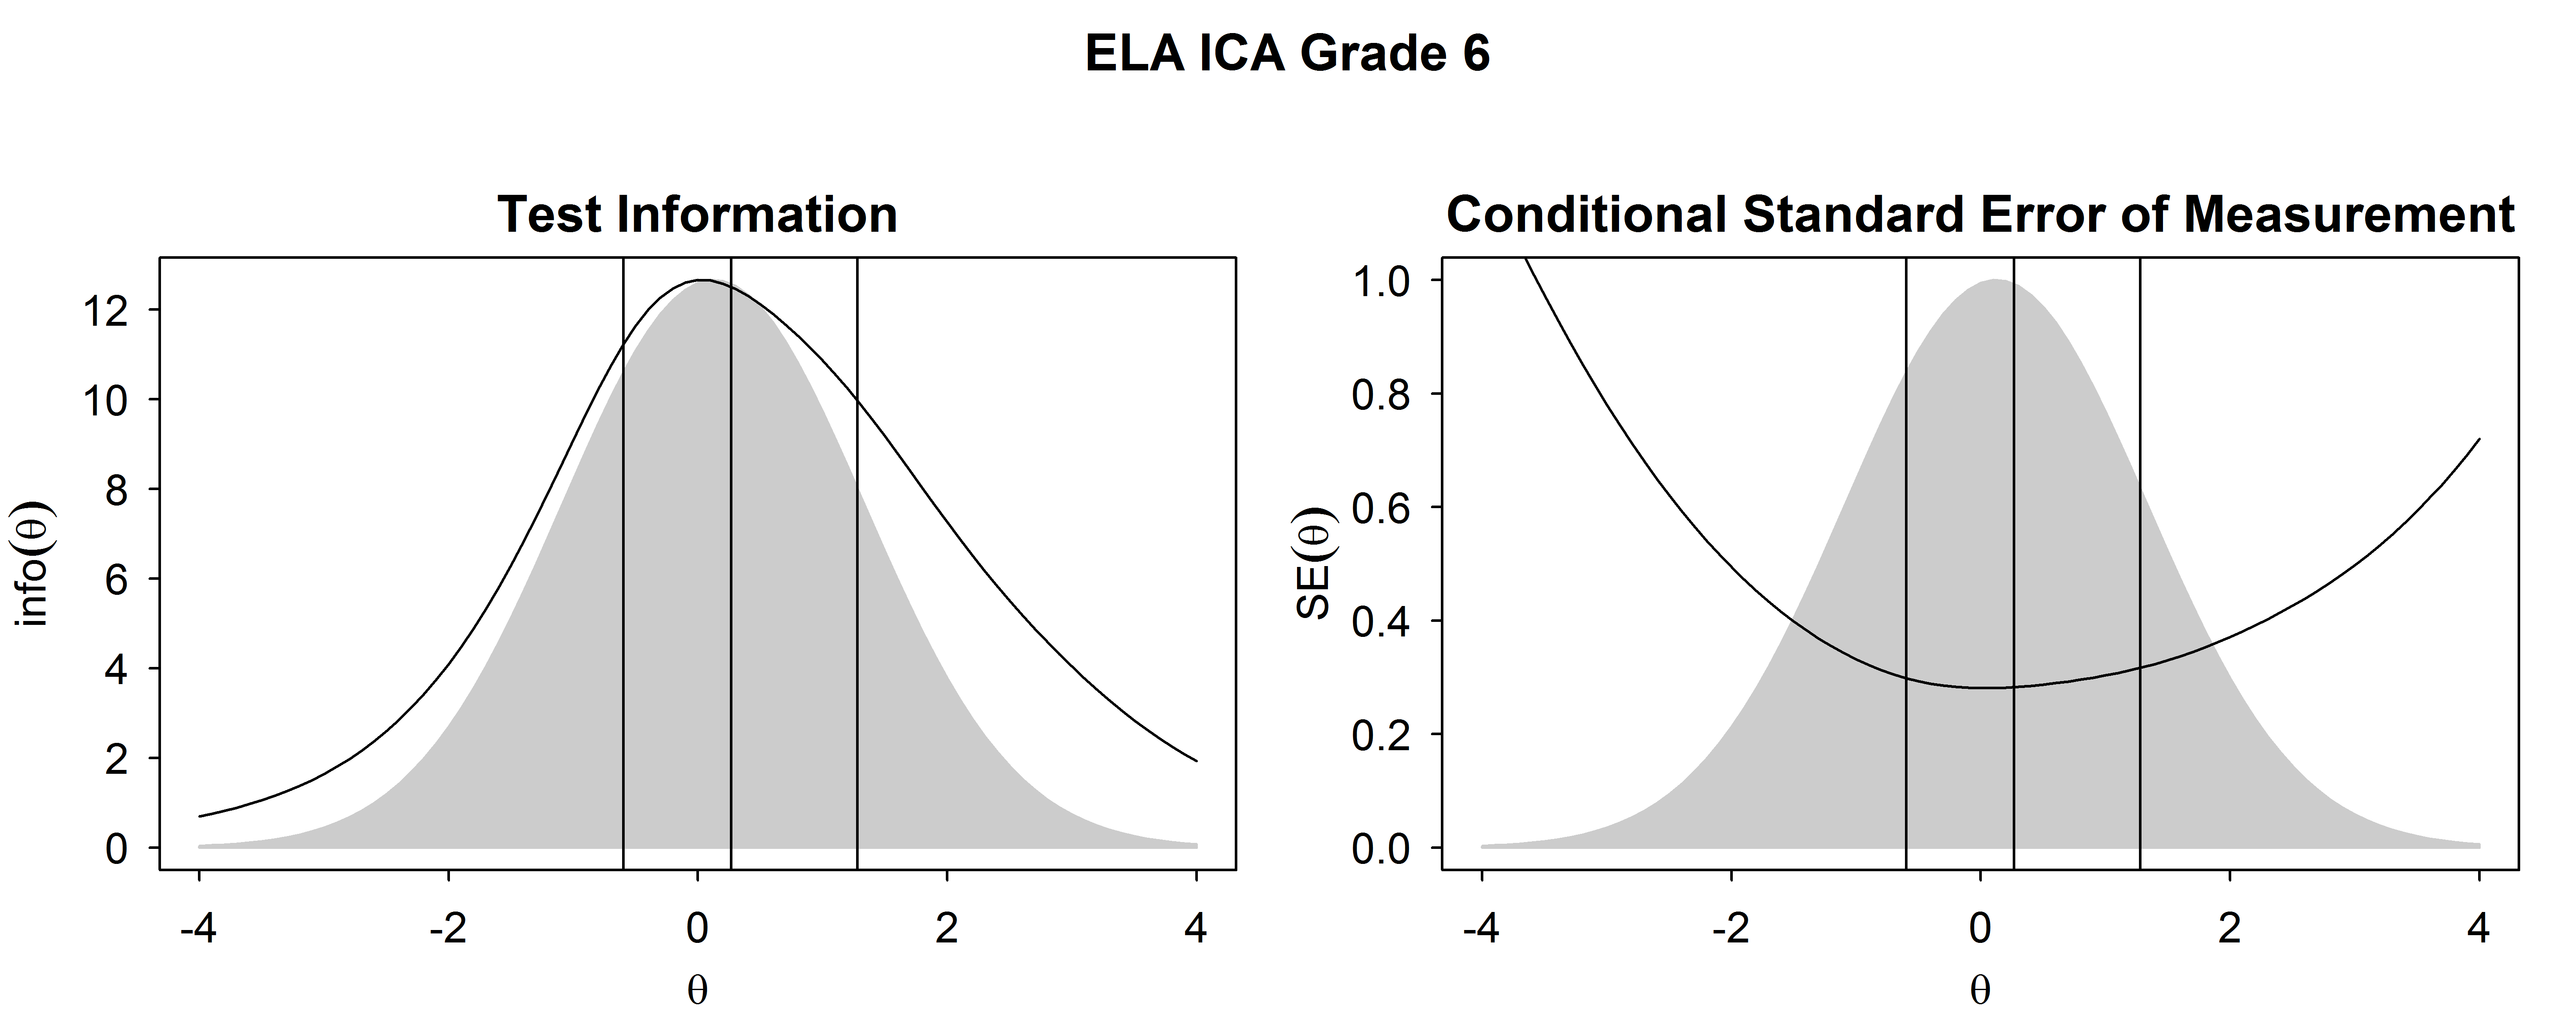 Test Information Functions and SEM For ELA/Literacy ICA, Grade 6